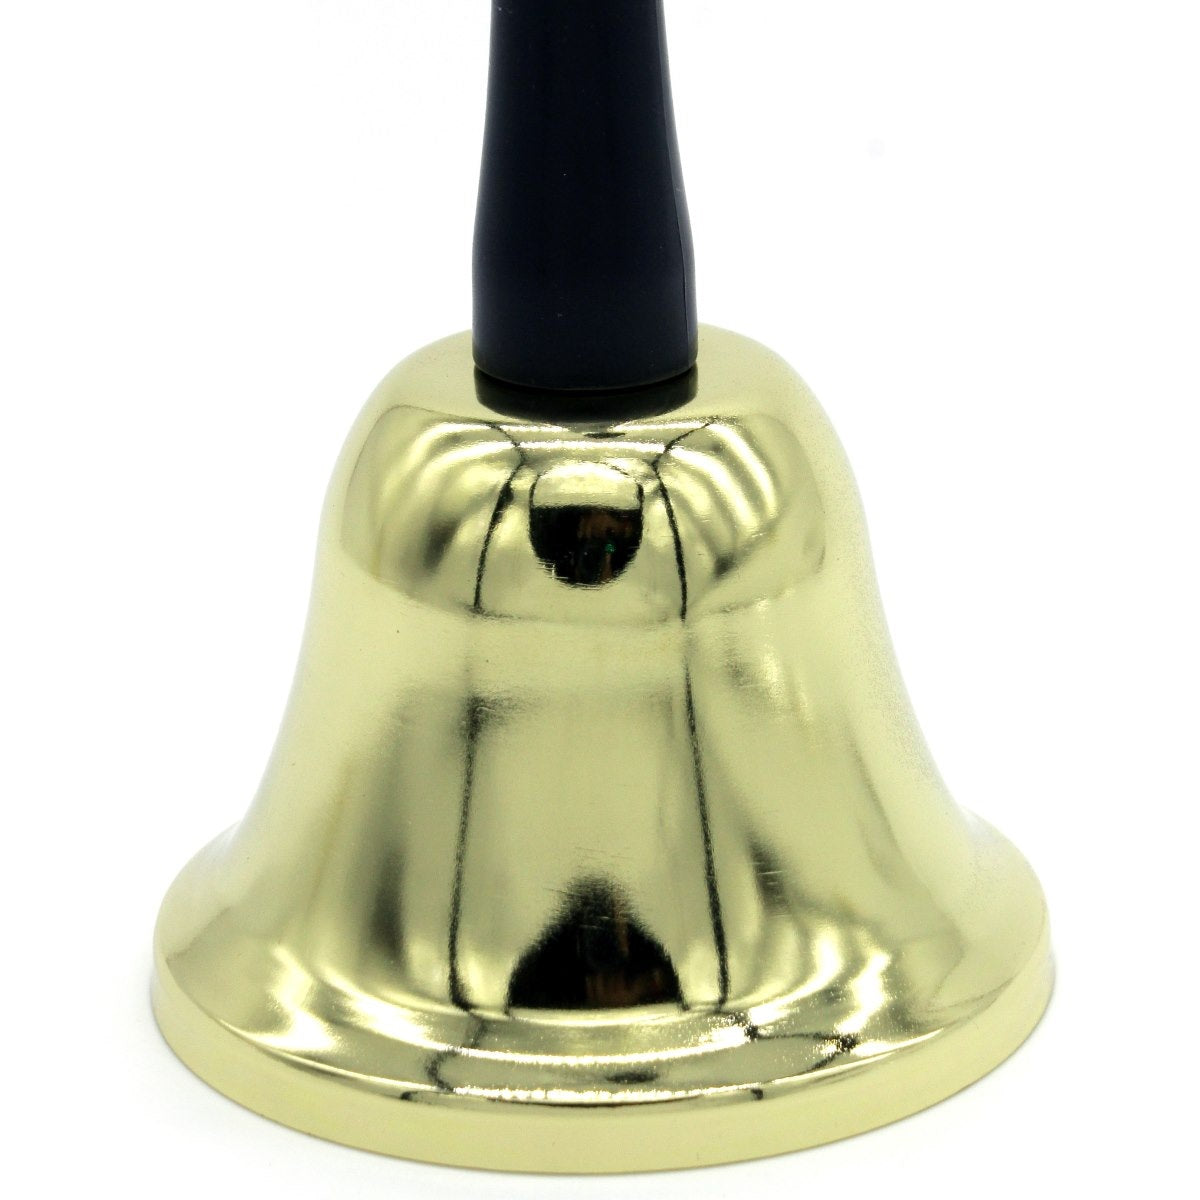 Multipurpose Golden Office Call Bell - For Shops, Office Use, Corporate Gifting JAQJ126-01G